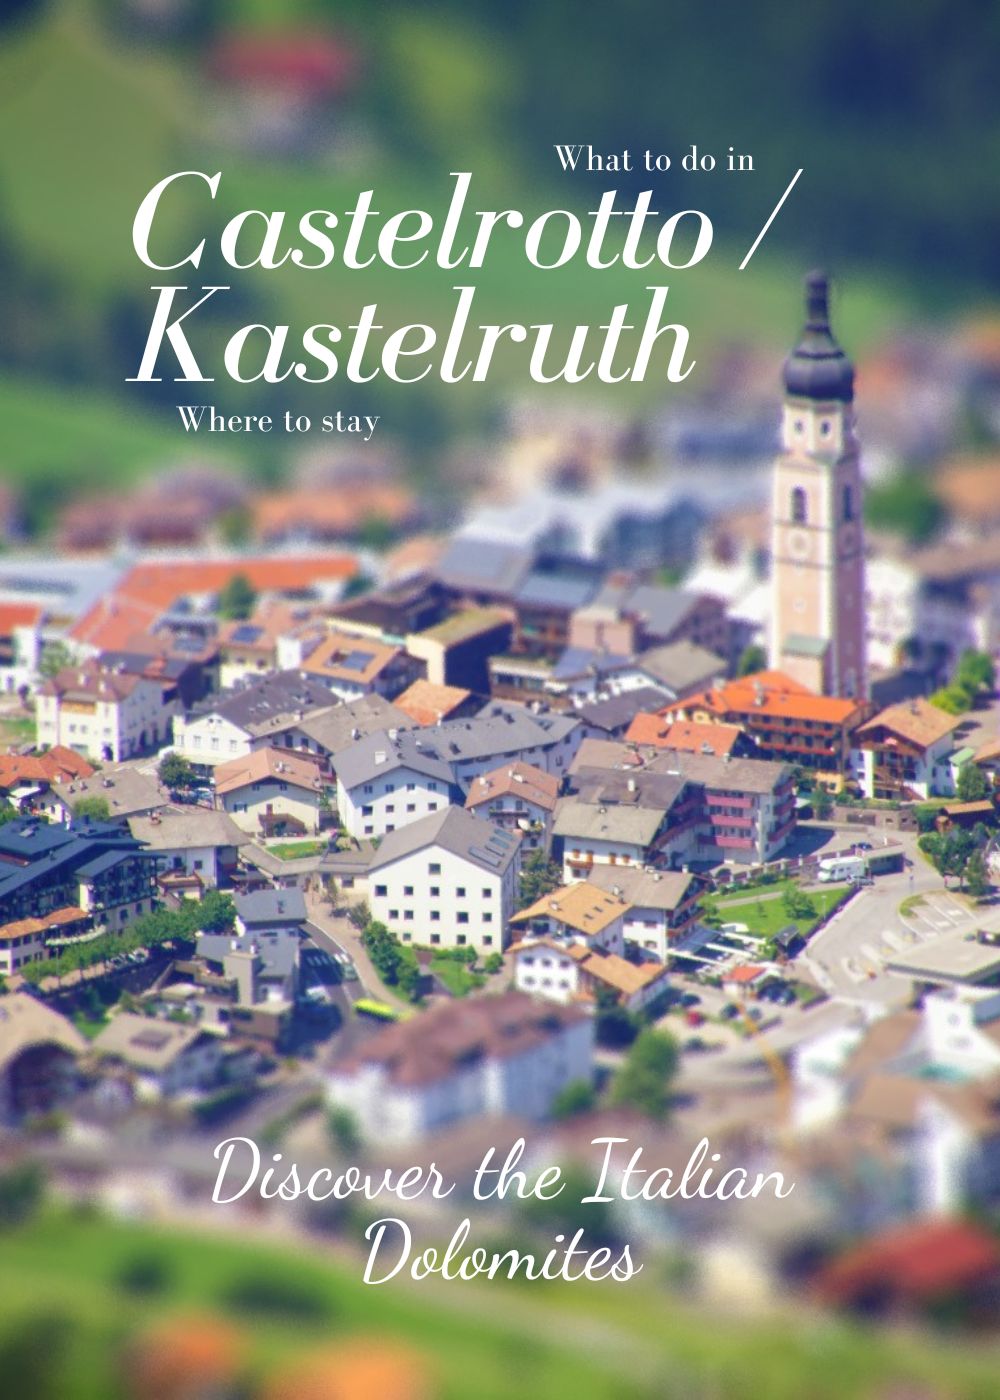 Kastelruth Italy Castelrotto why you should go is it worth visiting things to do where to stay best time to visit